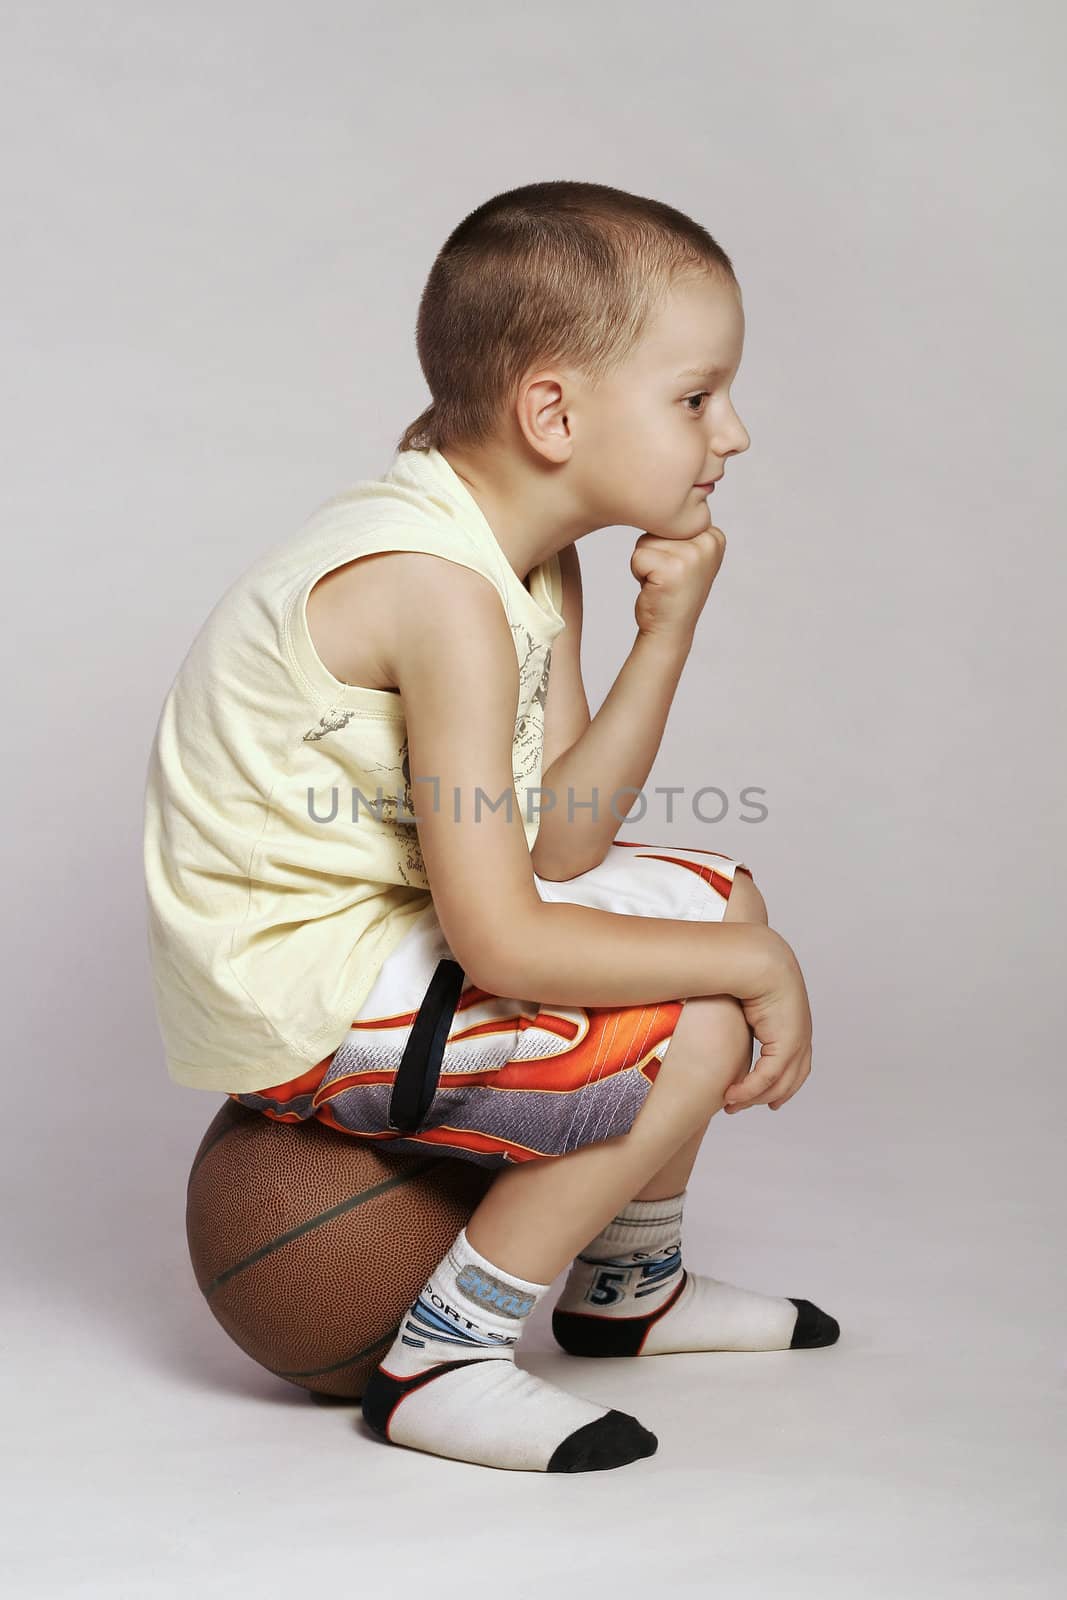 Child sitting on a ball and thinking